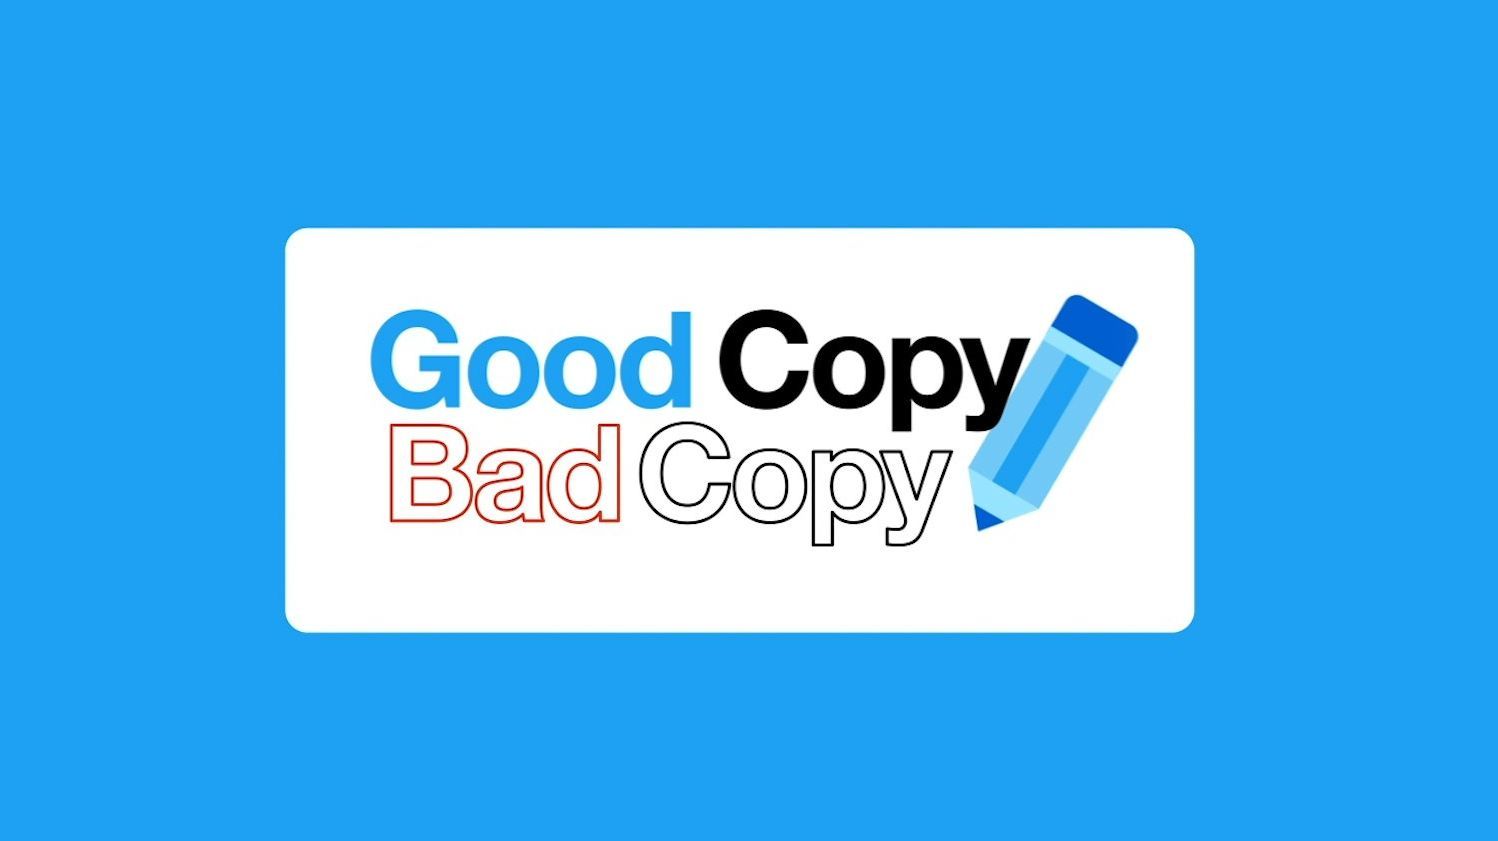 Good copy, bad copy: Tips for writing effective Tweets